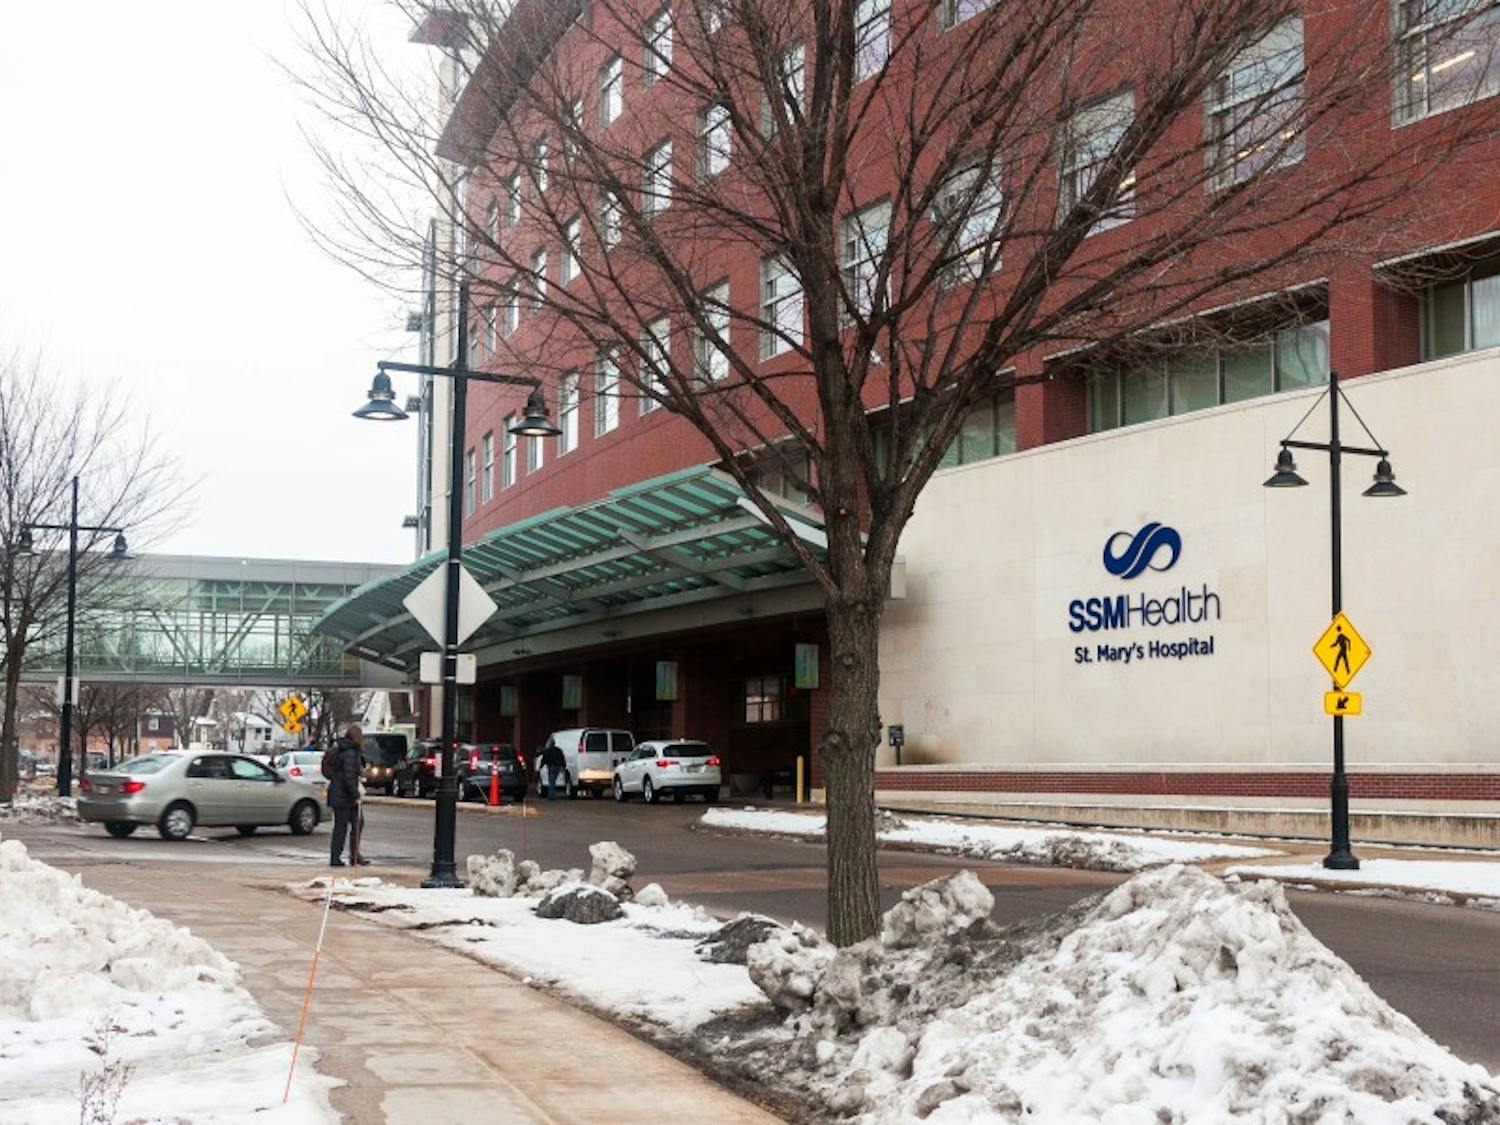 St. Mary’s Hospital failed to provide three different sexual assault victims in 2015 with information on or access to emergency contraceptives, according to a document obtained by the State Journal.